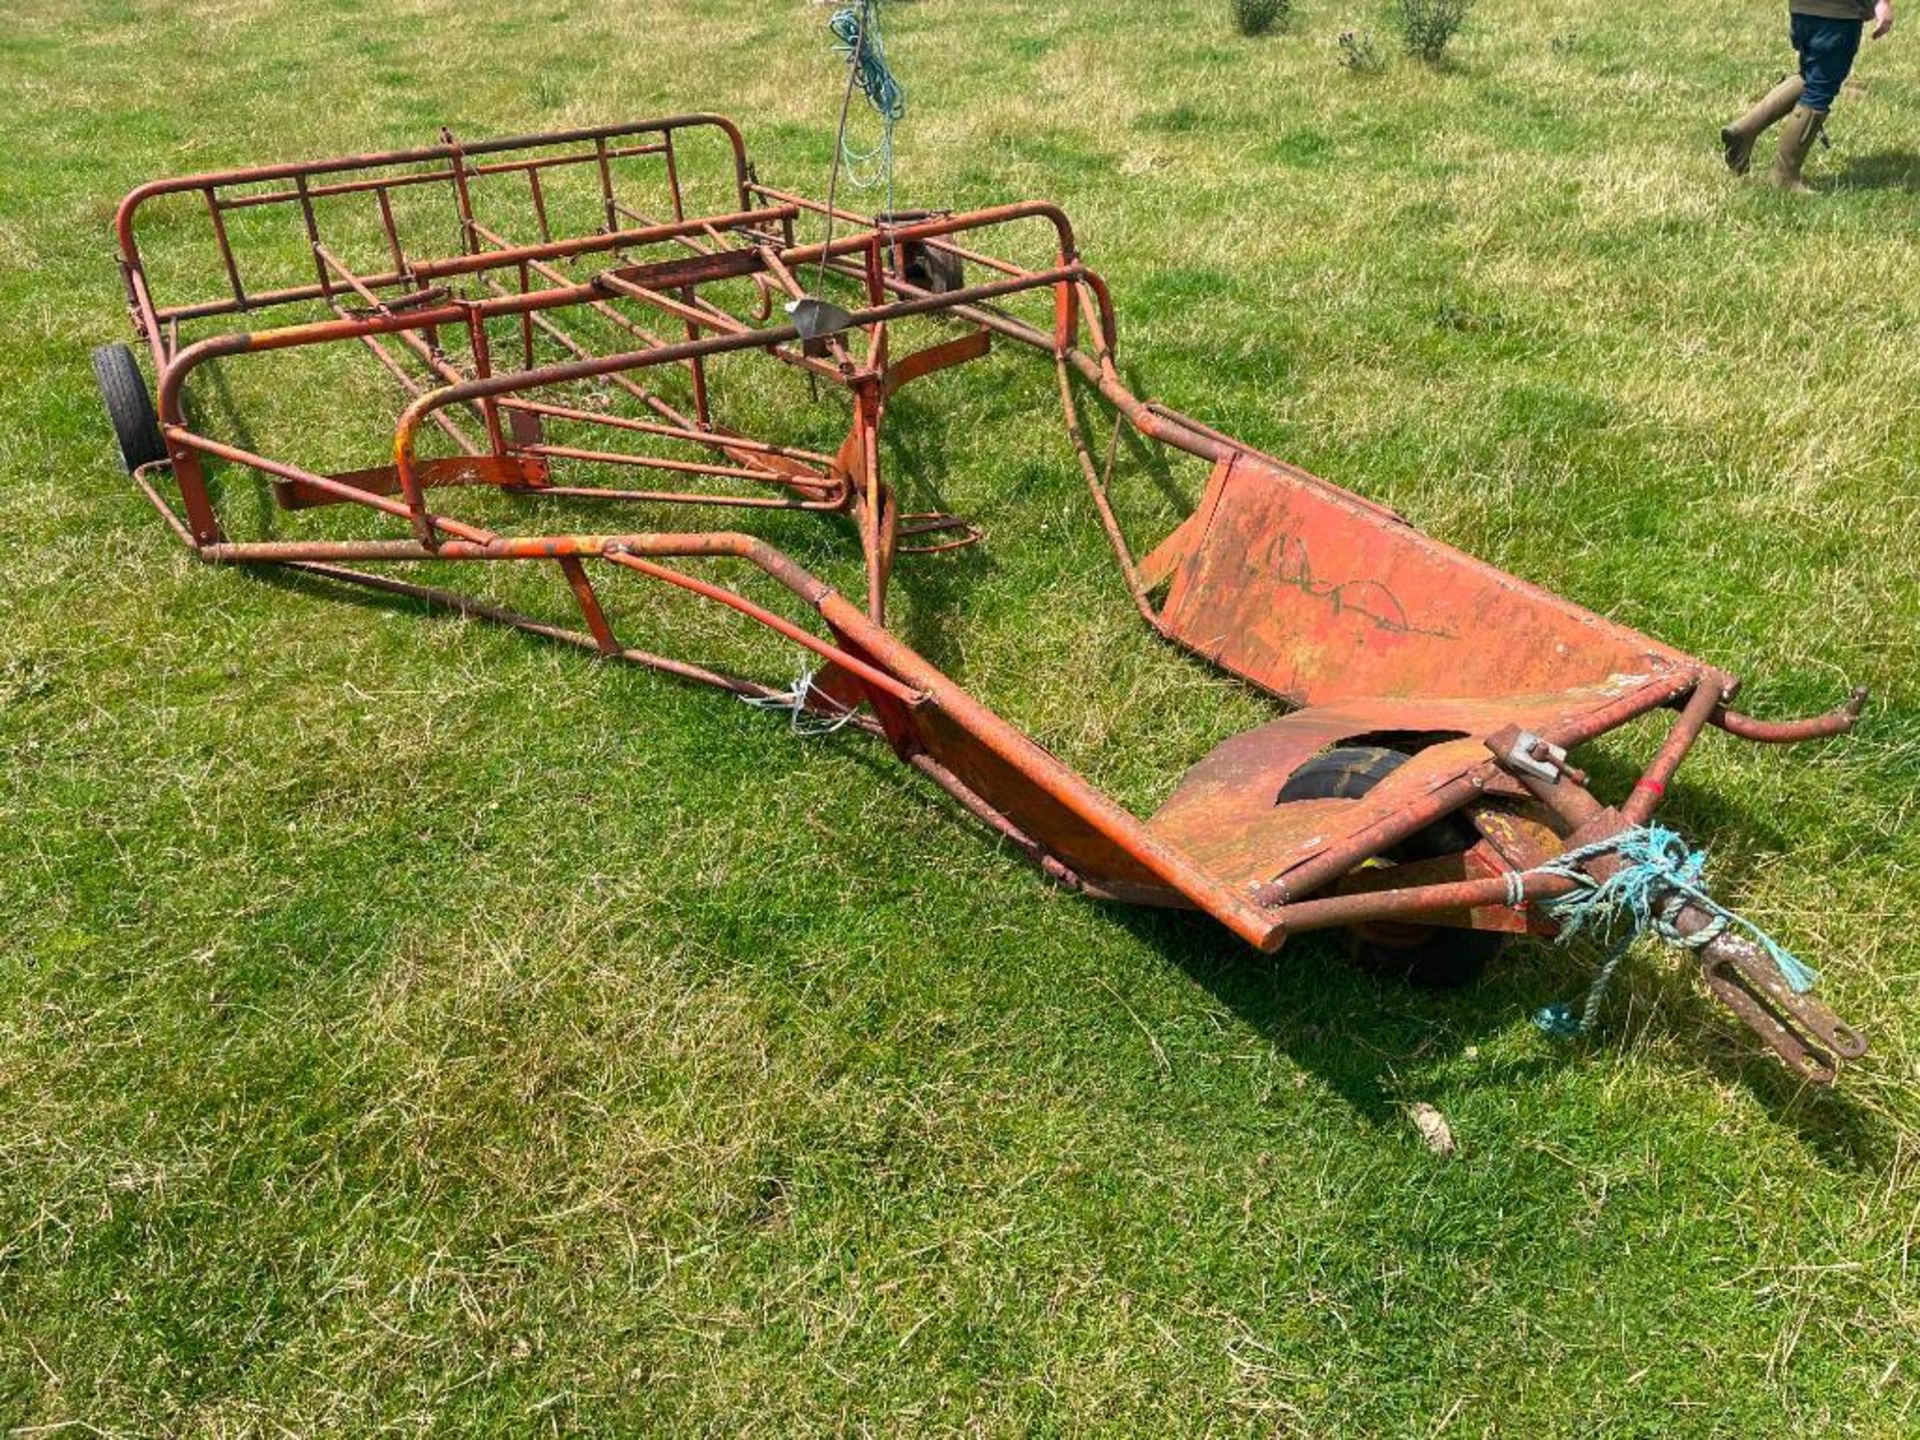 Browns flat 8 bale sledge - Image 3 of 4